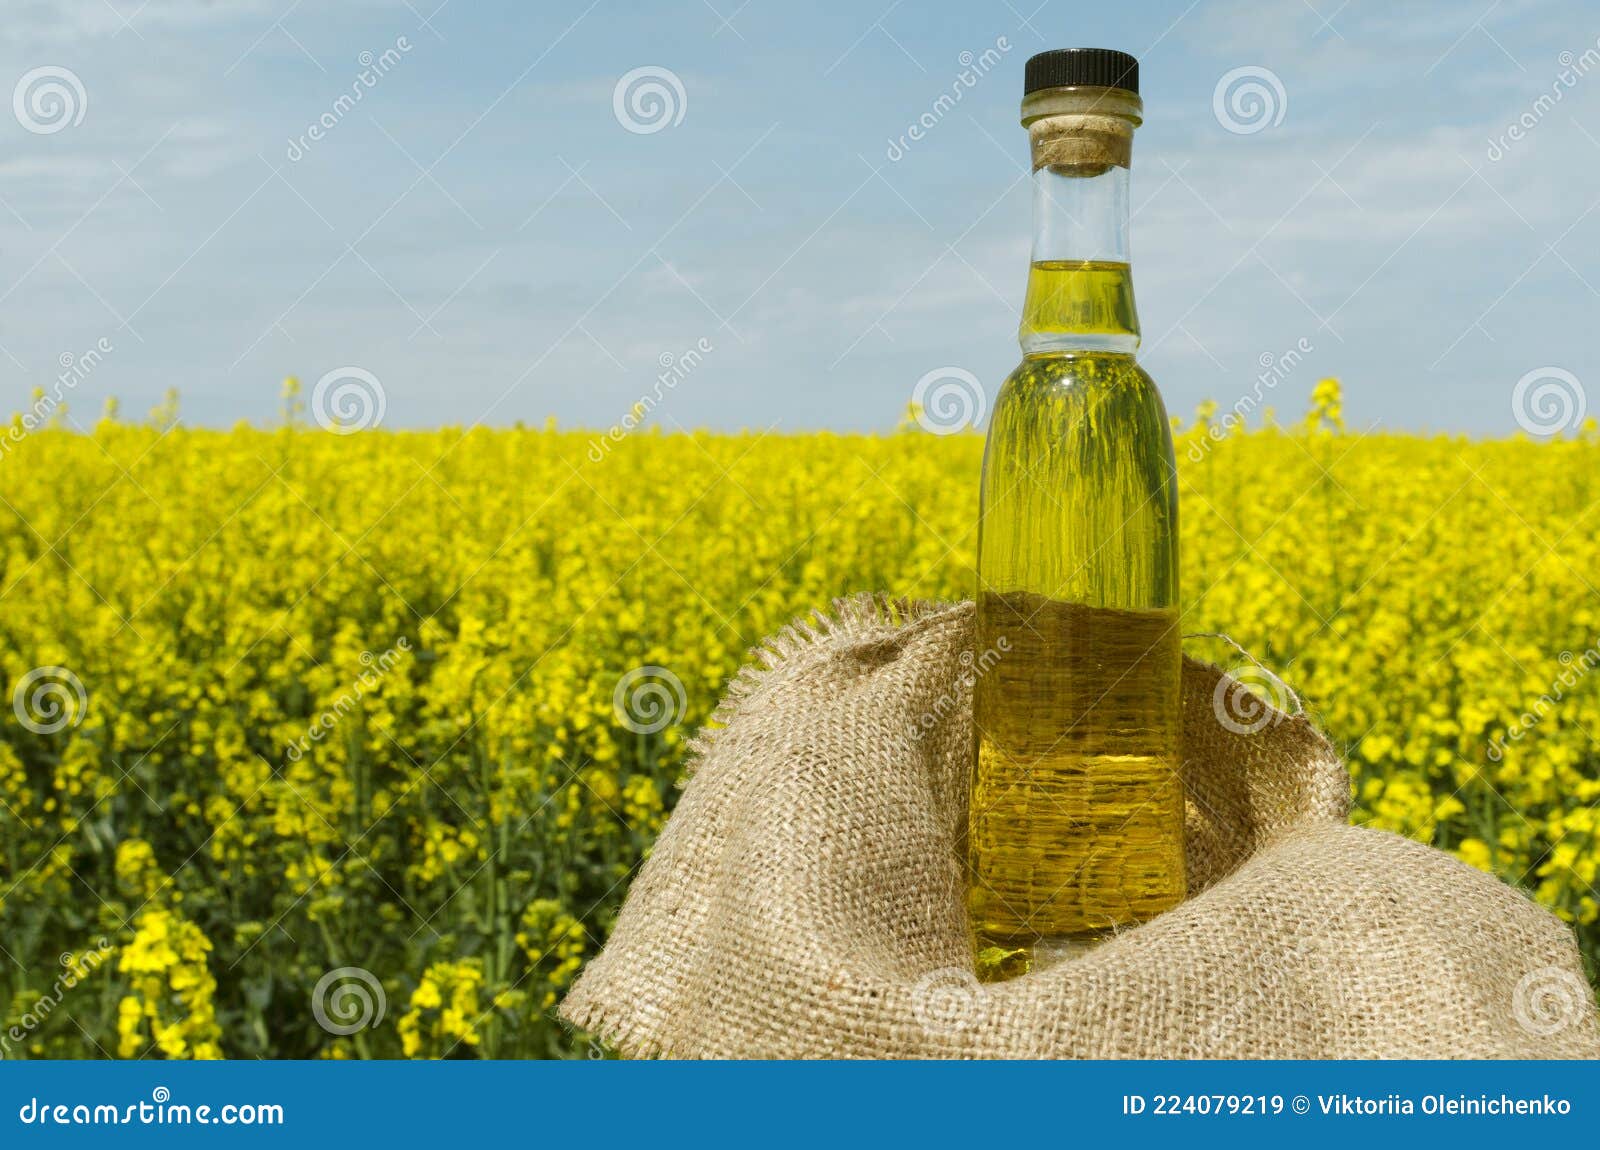 closeup of glass bottle of canola oil, sackcloth against canola field.empty space